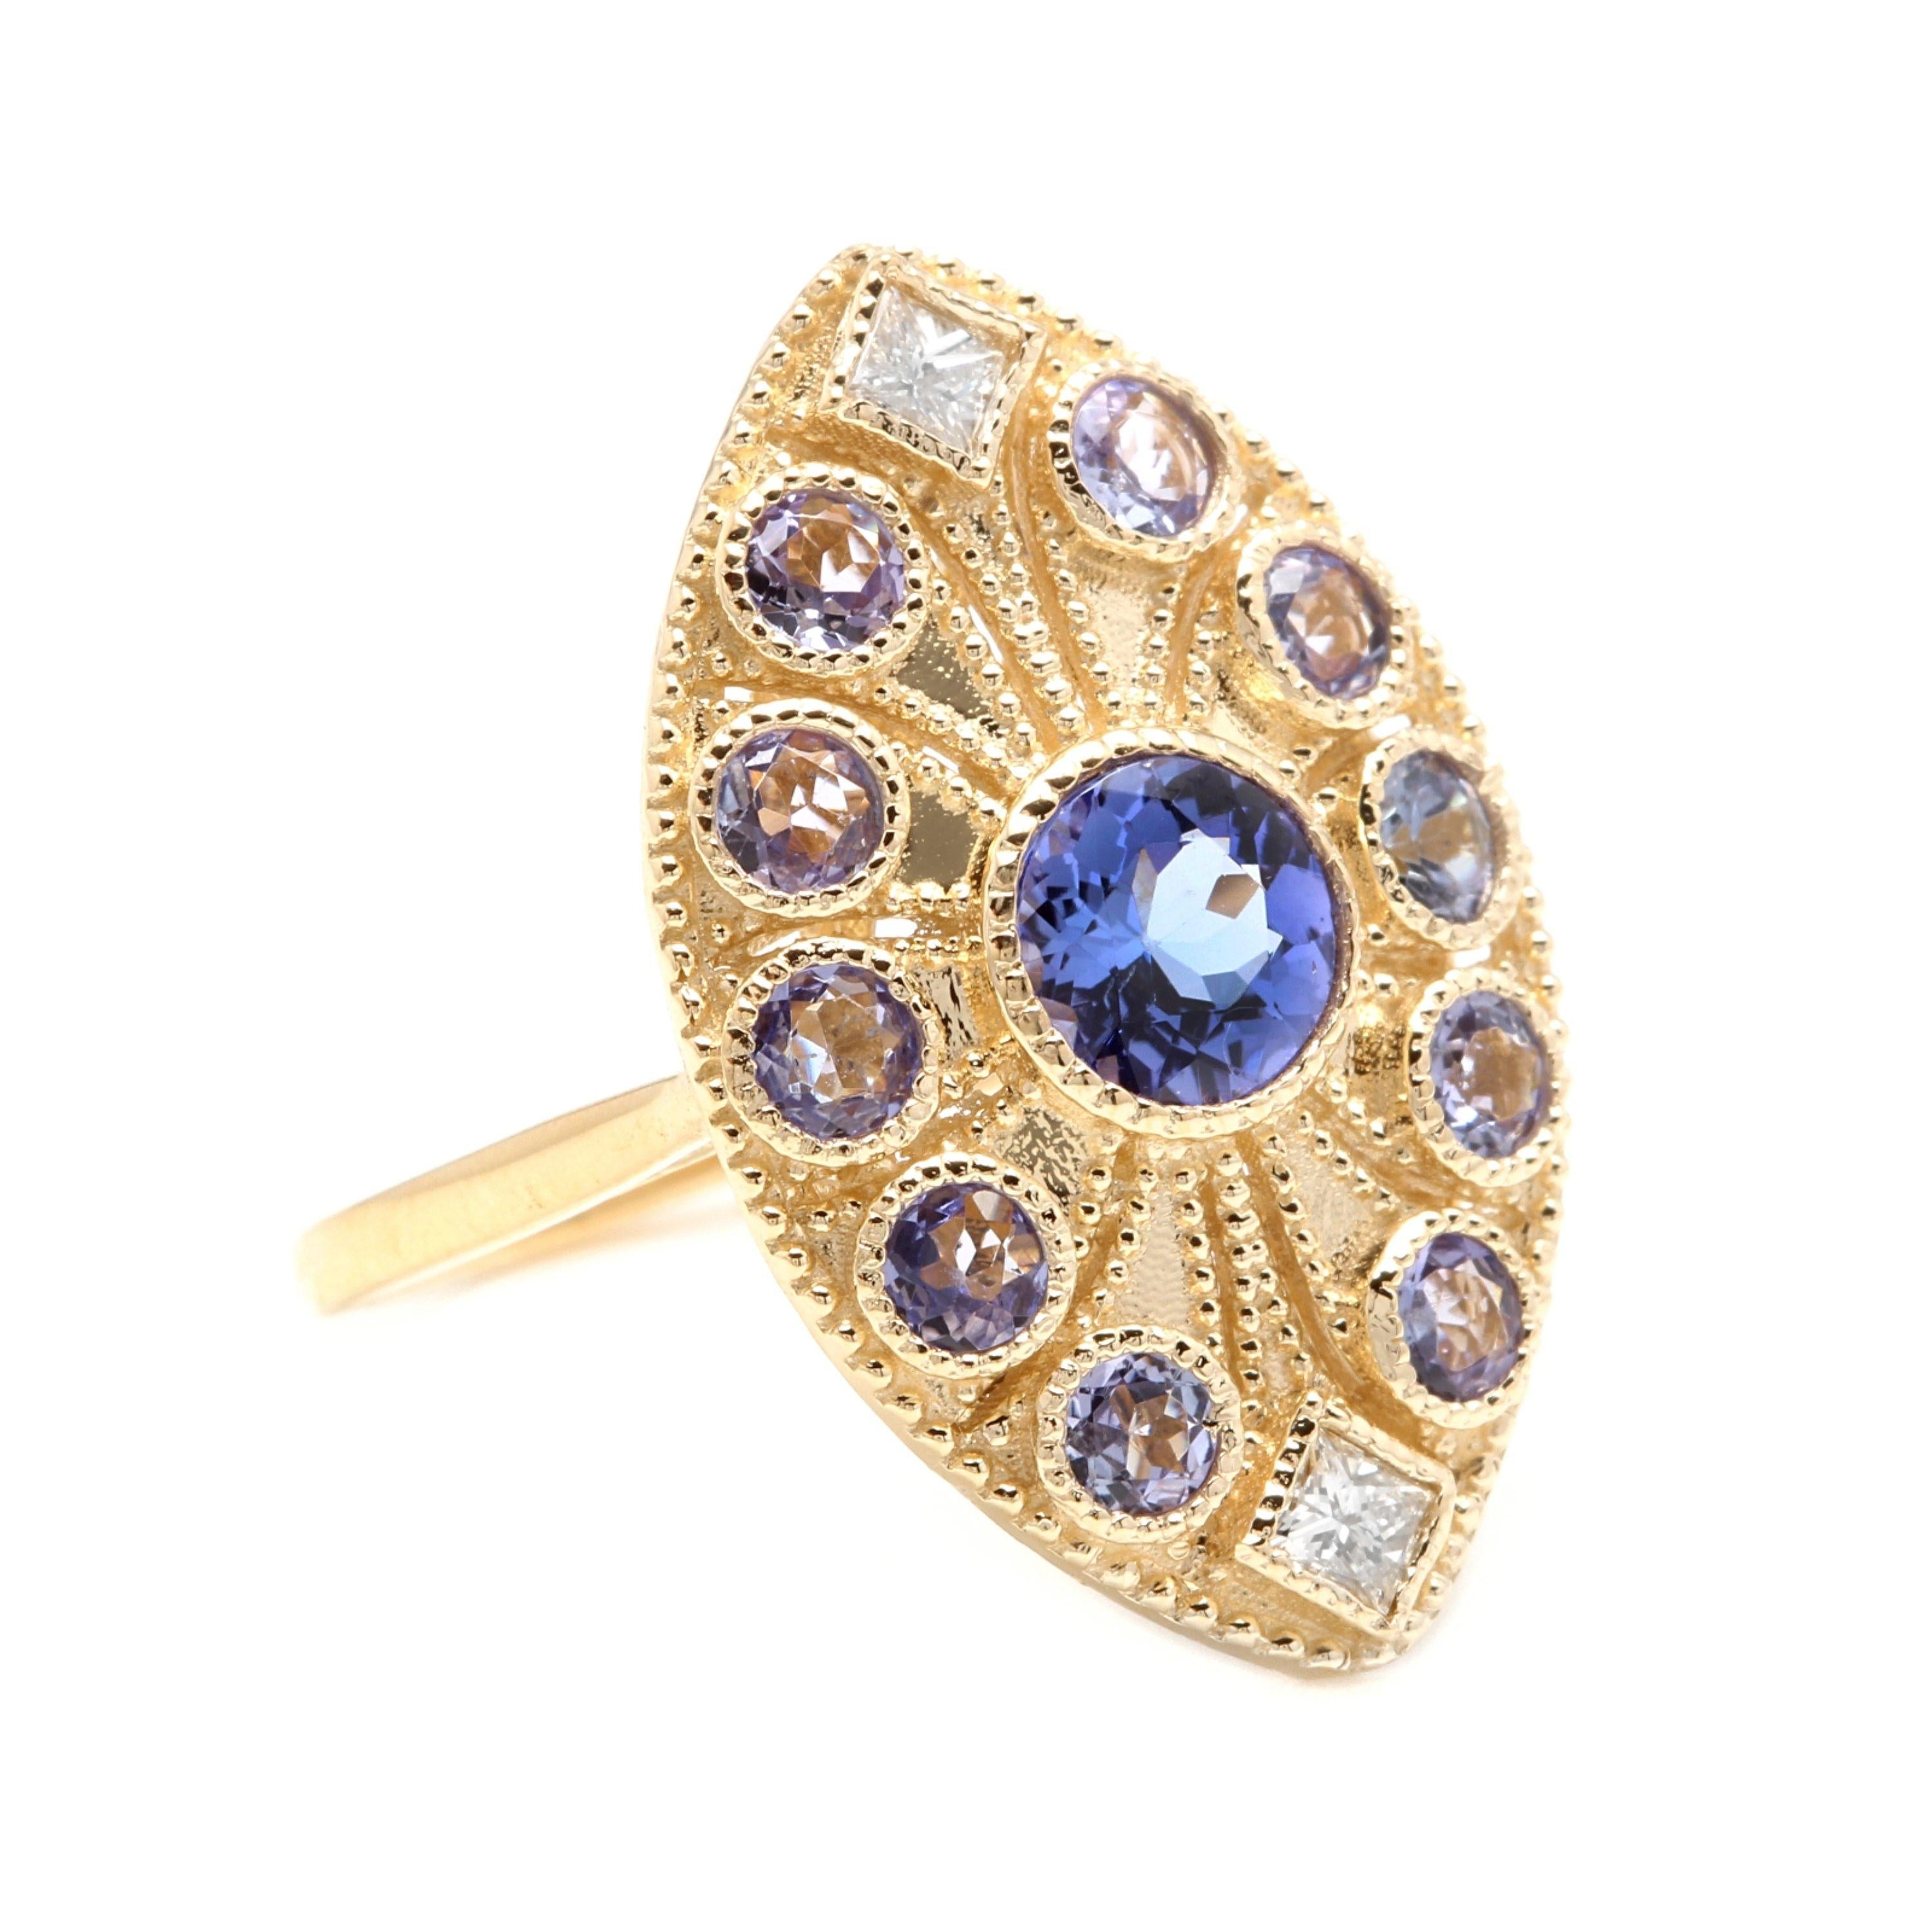 2.44 Carats Natural Very Nice Looking Tanzanite and Diamond 14K Solid Yellow Gold Ring

Total Natural Round Cut Center Tanzanite Weight is: Approx. 1.00 Carat

Tanzanite Measures: Approx. 6.20mm

Total Natural Side Tanzanites Weight is: Approx.